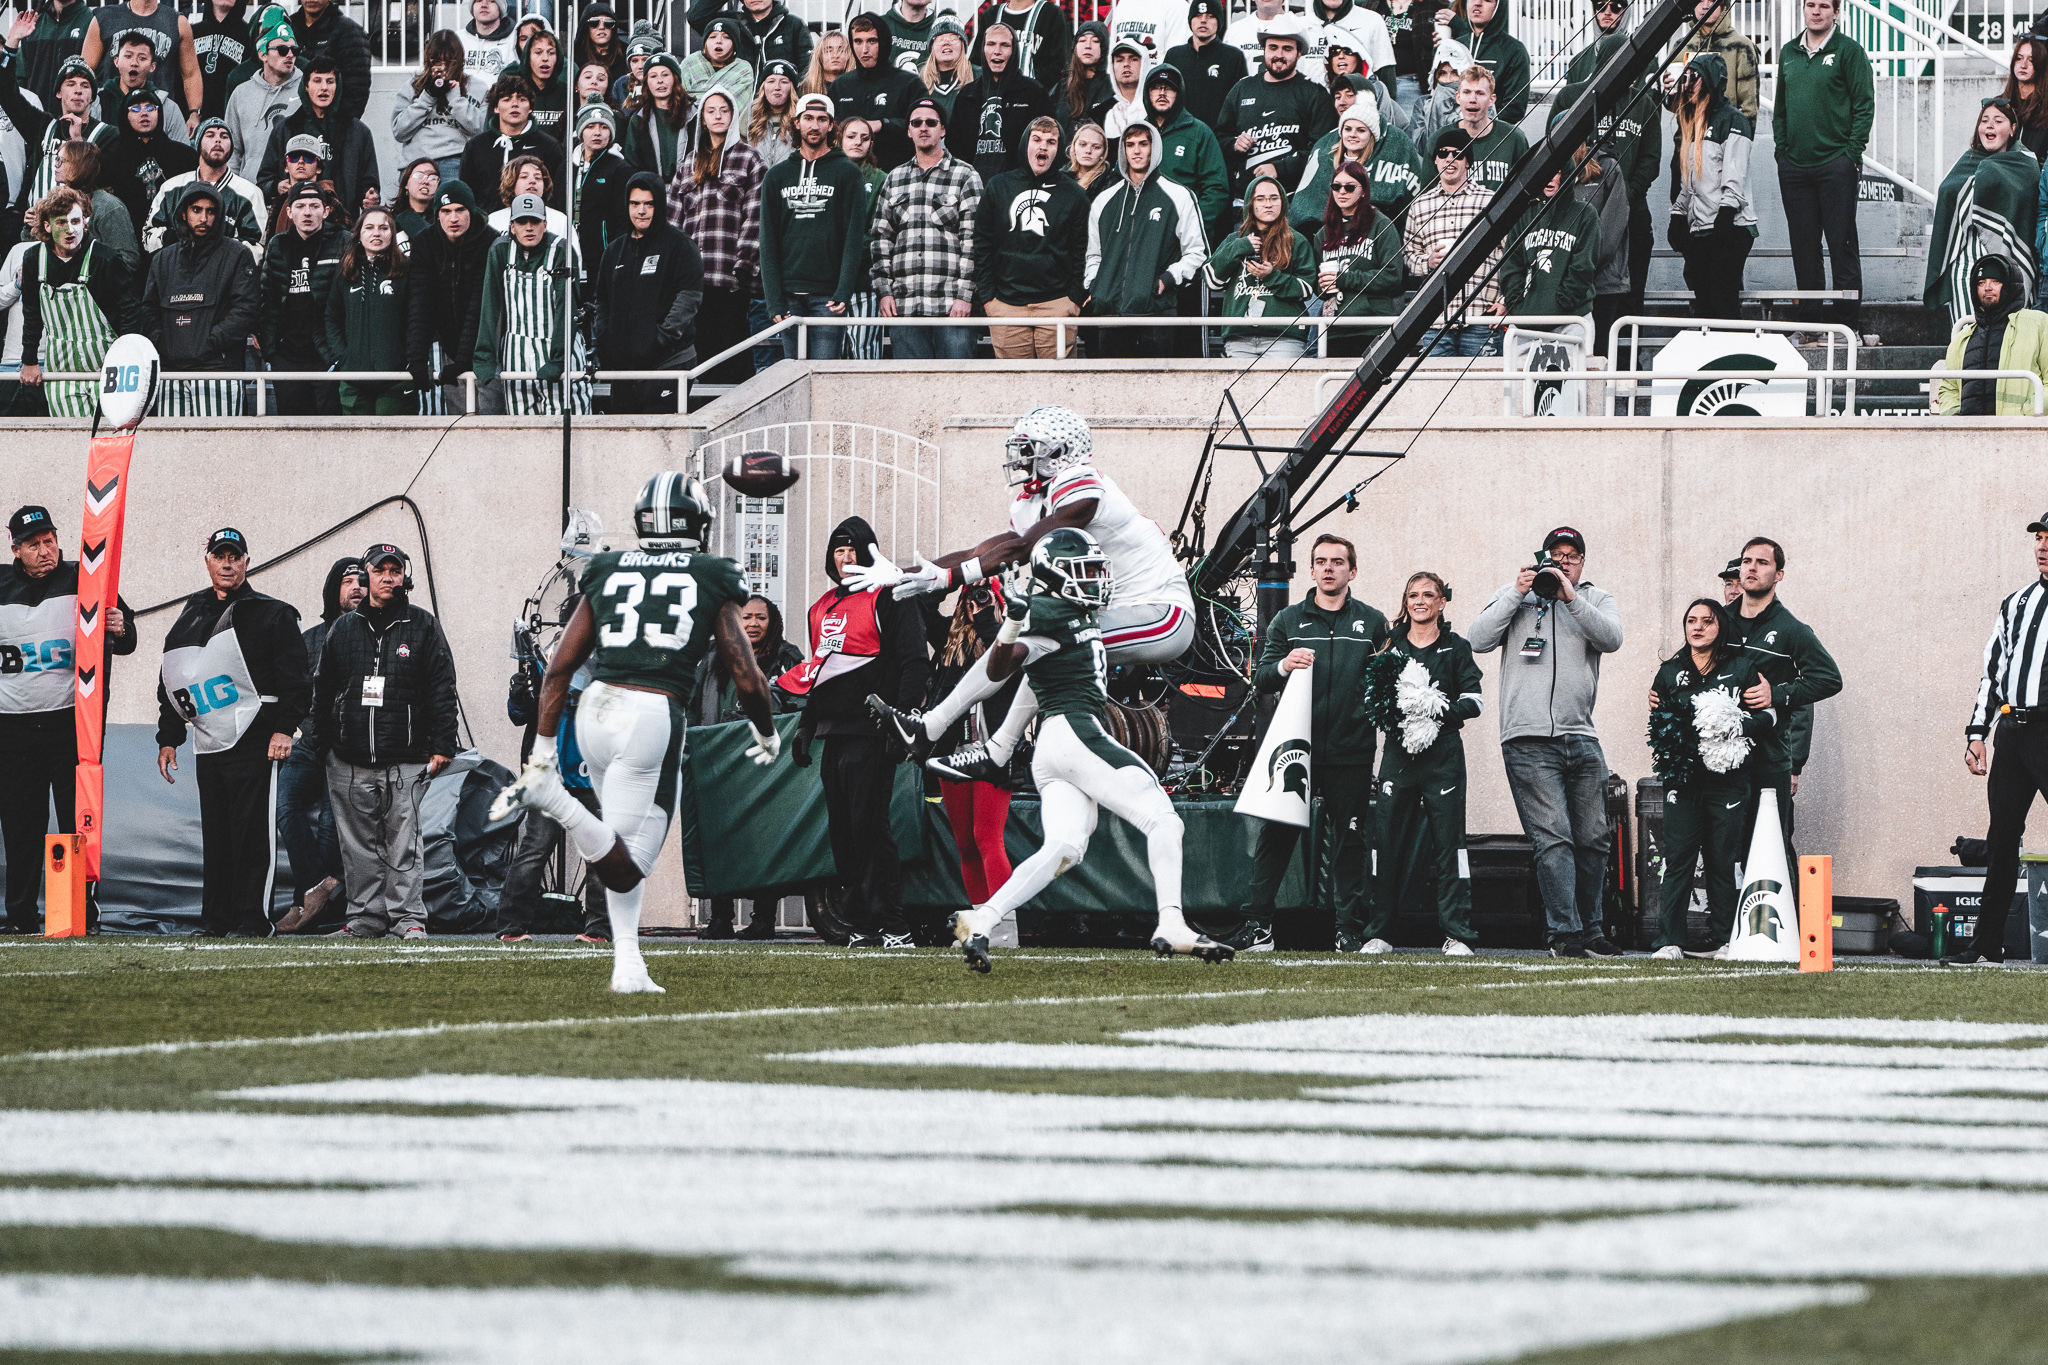 Stroud's 6 Touchdowns Lifts #3 Ohio State Over Spartans